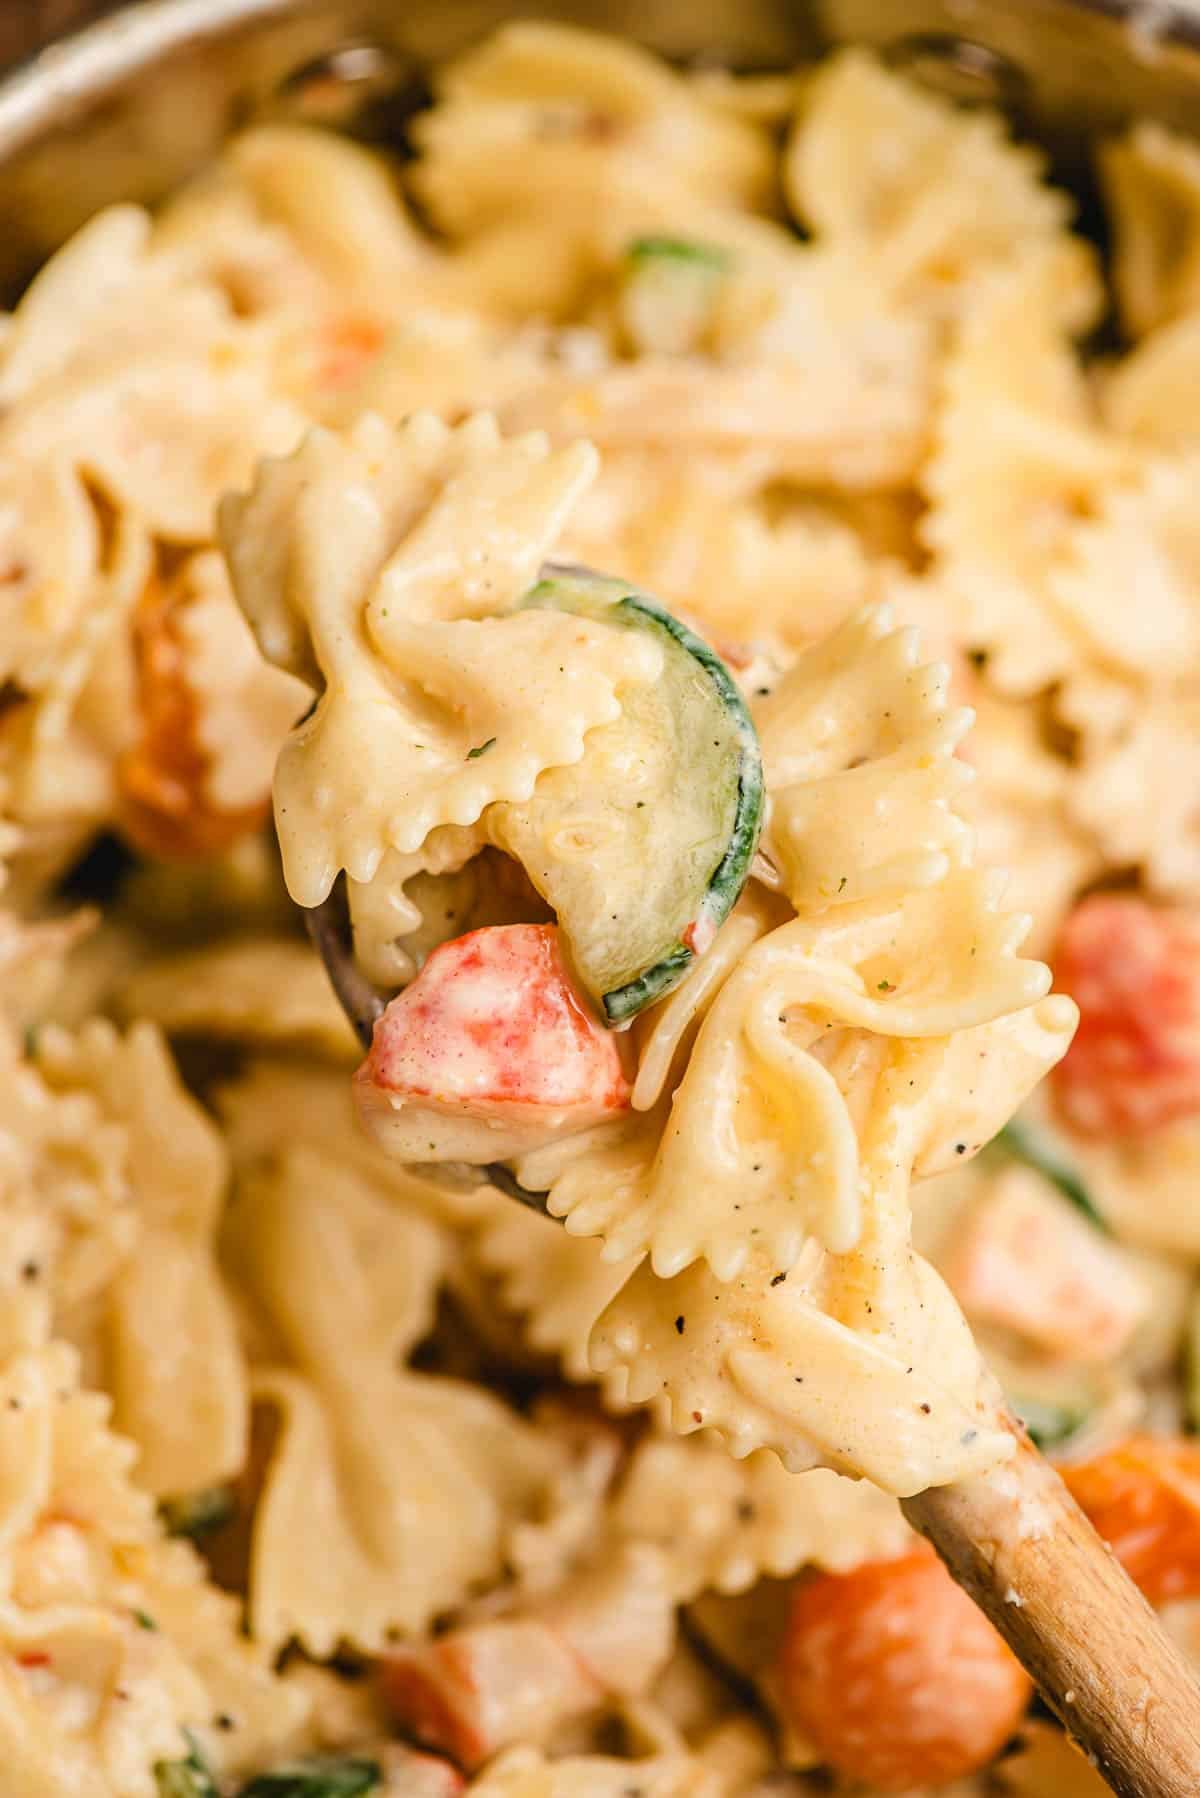 Spoonful of pantry pasta with creamy parmesan sauce.